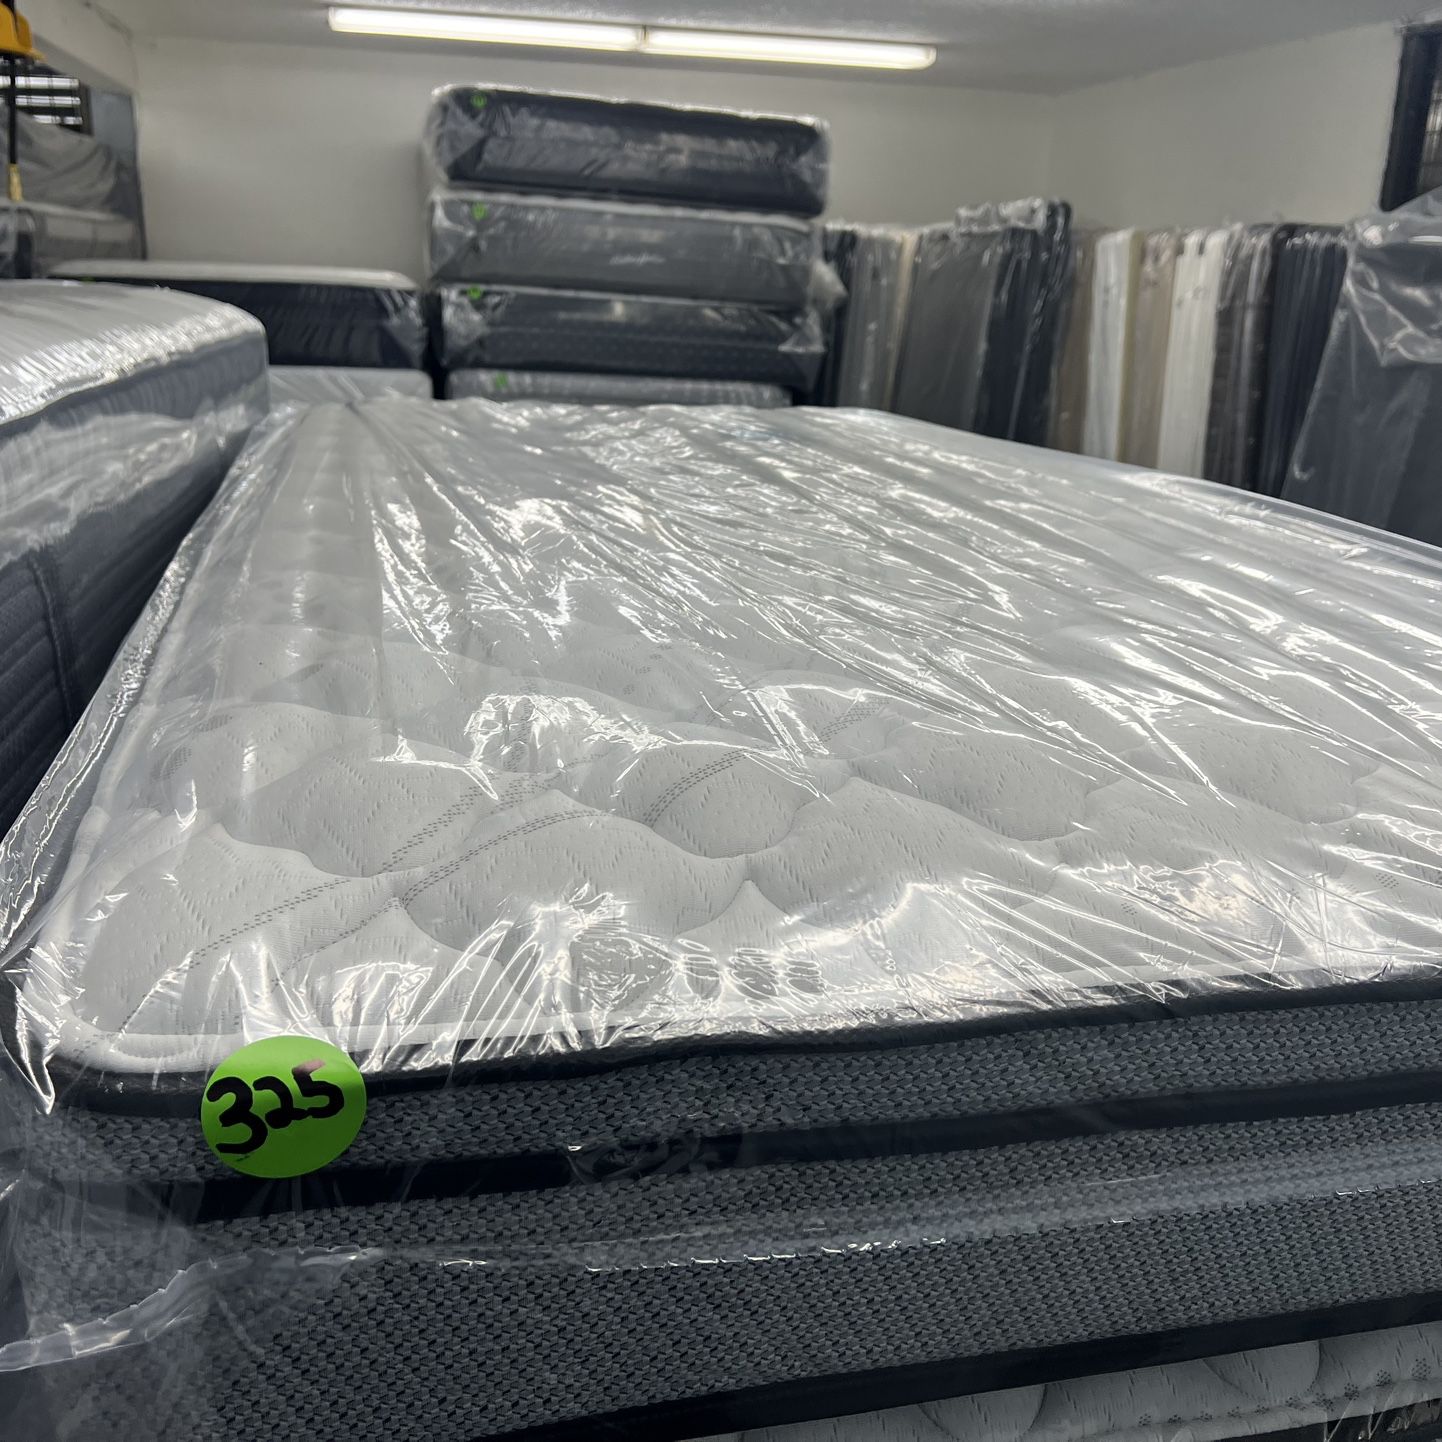 BRAND NEW WITH WARRANTY TWIN SIZE EUROTOP MATTRESS & BOX SPRING BED SET